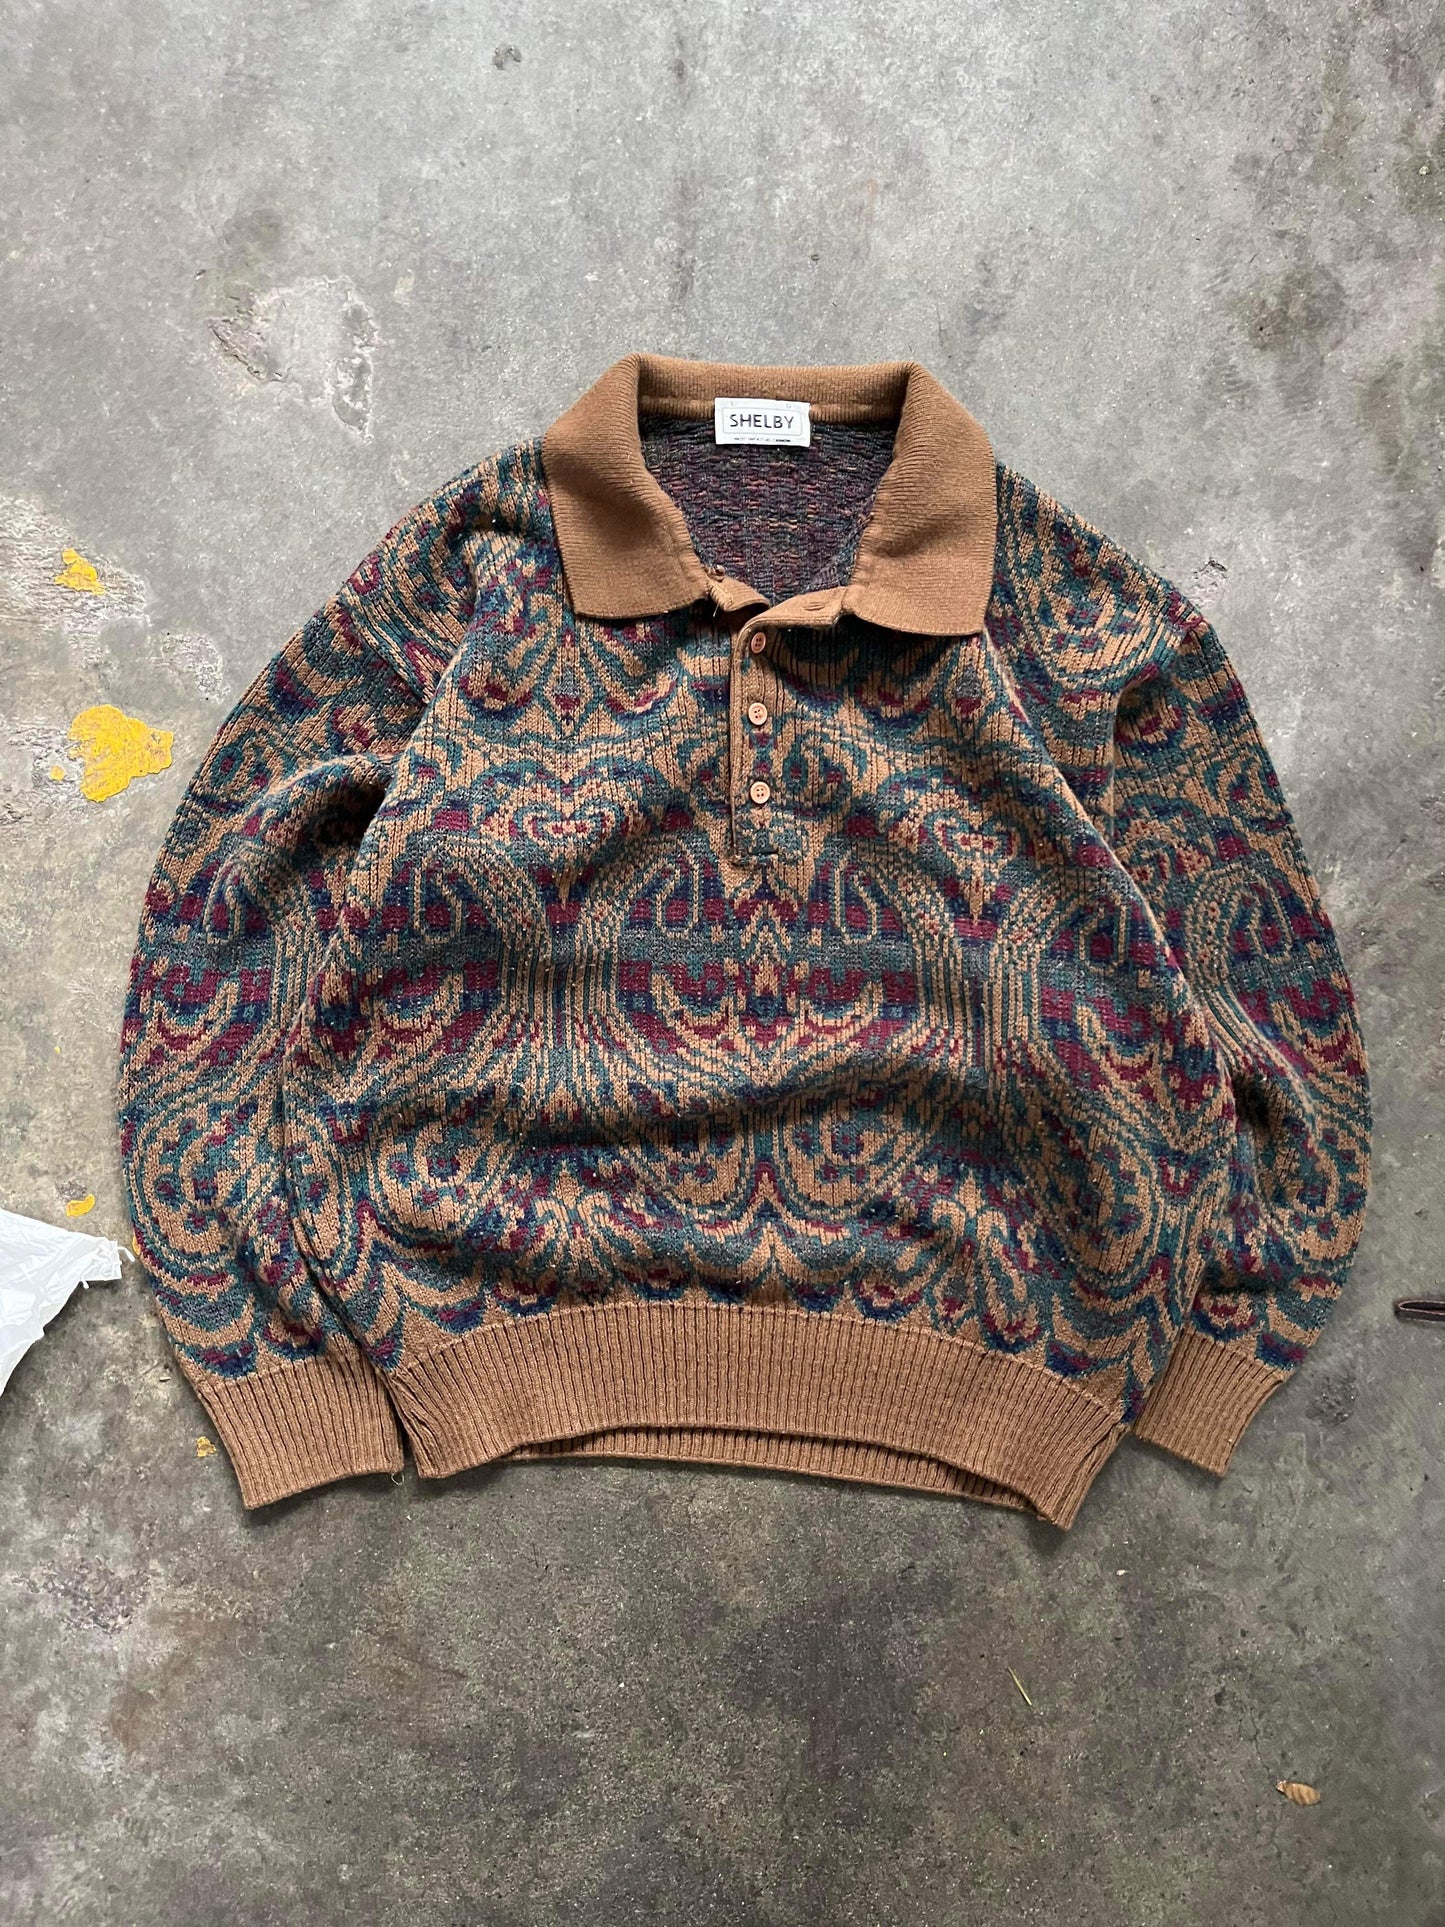 (L) 90’s Polo Style Knit